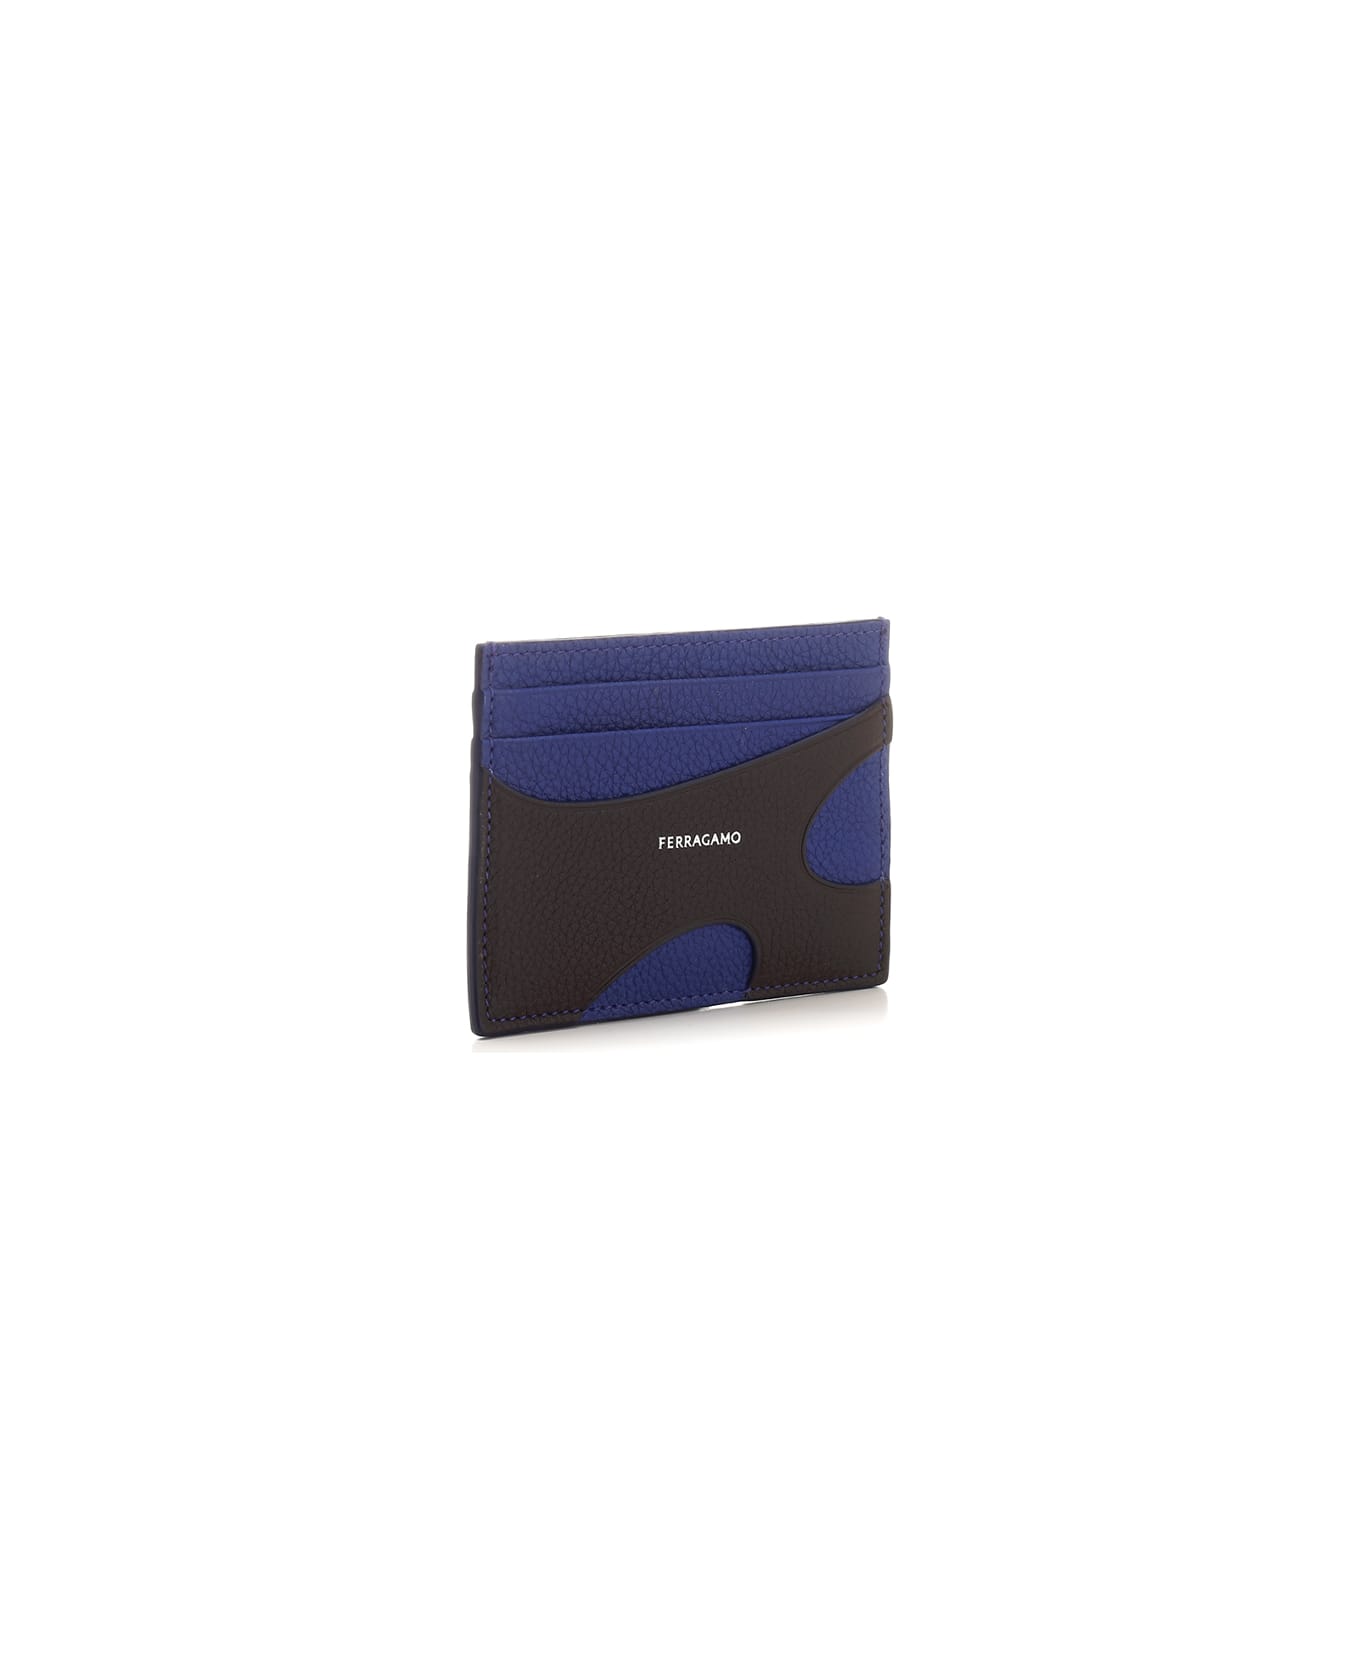 Ferragamo Black Card Holder With Blue Cut Out - T.moro/lapis